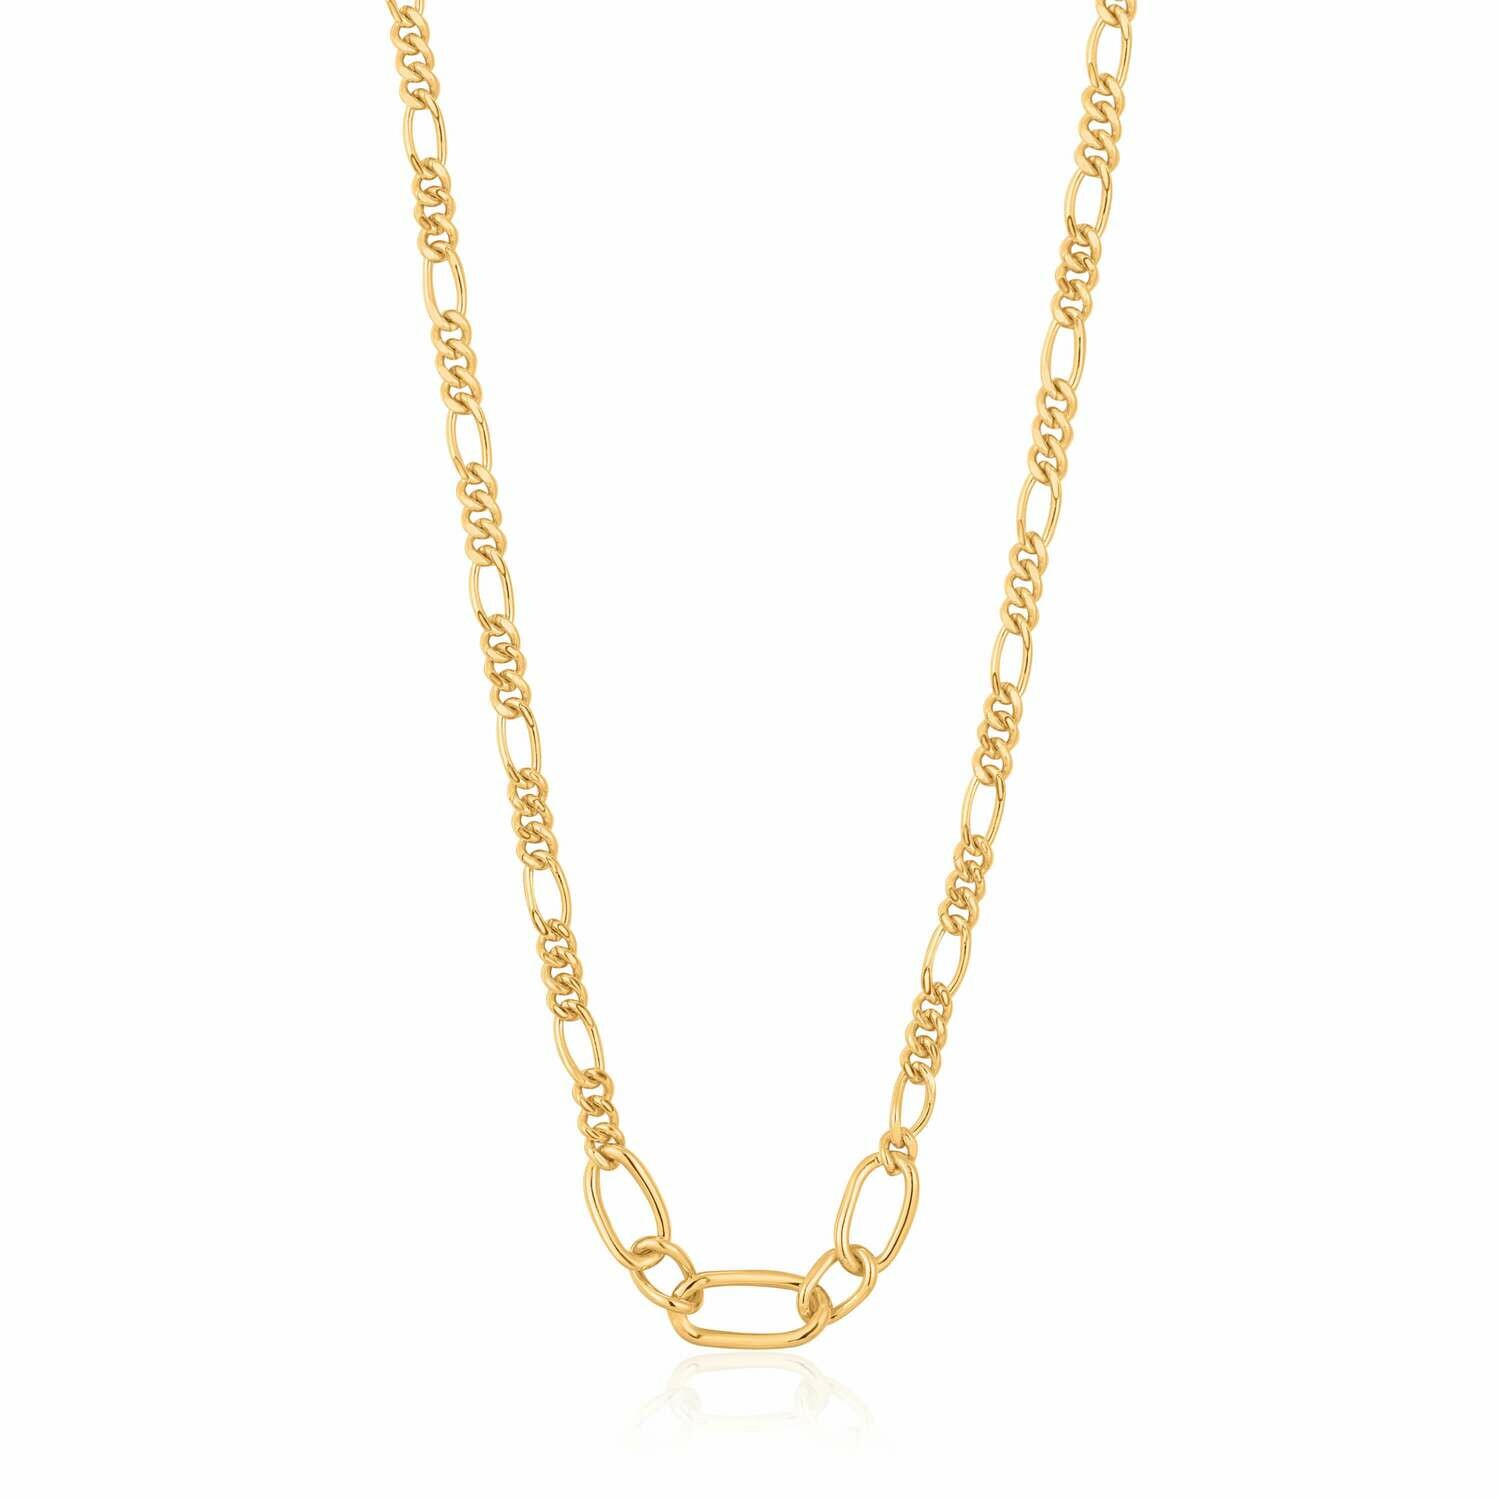 AH Chain Reaction: Figaro Chain Necklace - Gold